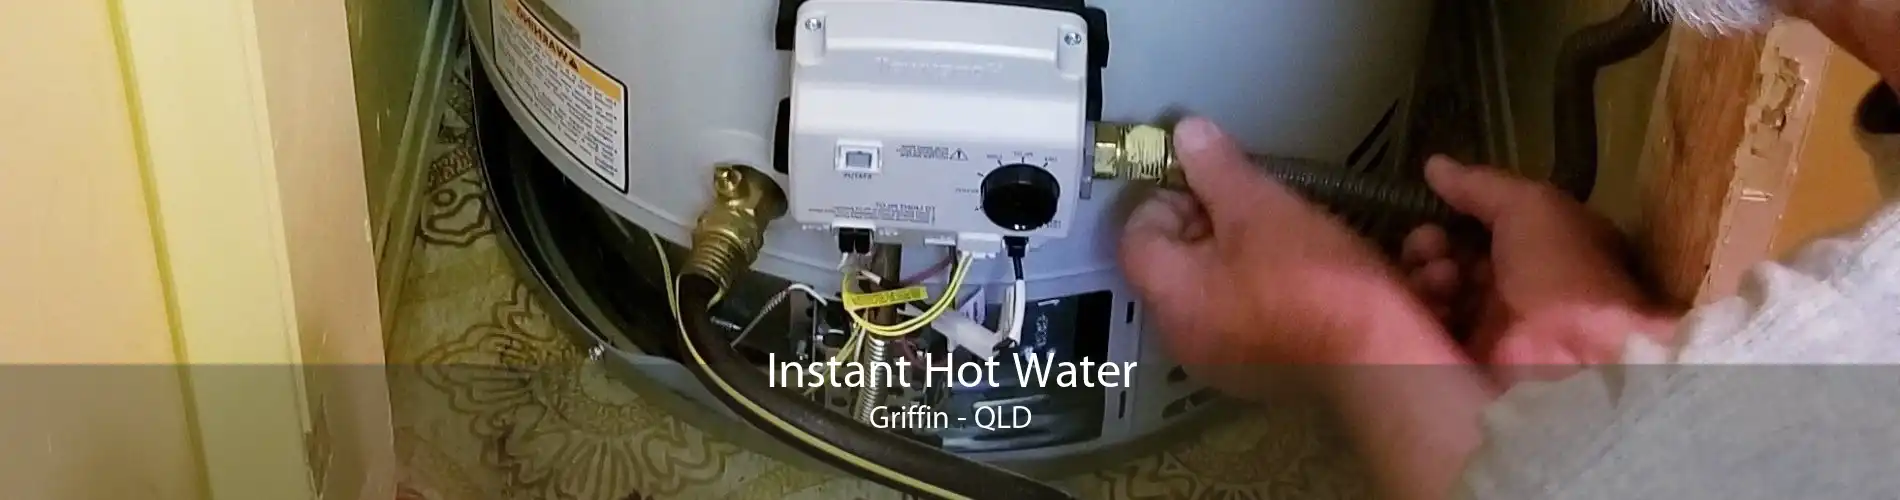 Instant Hot Water Griffin - QLD